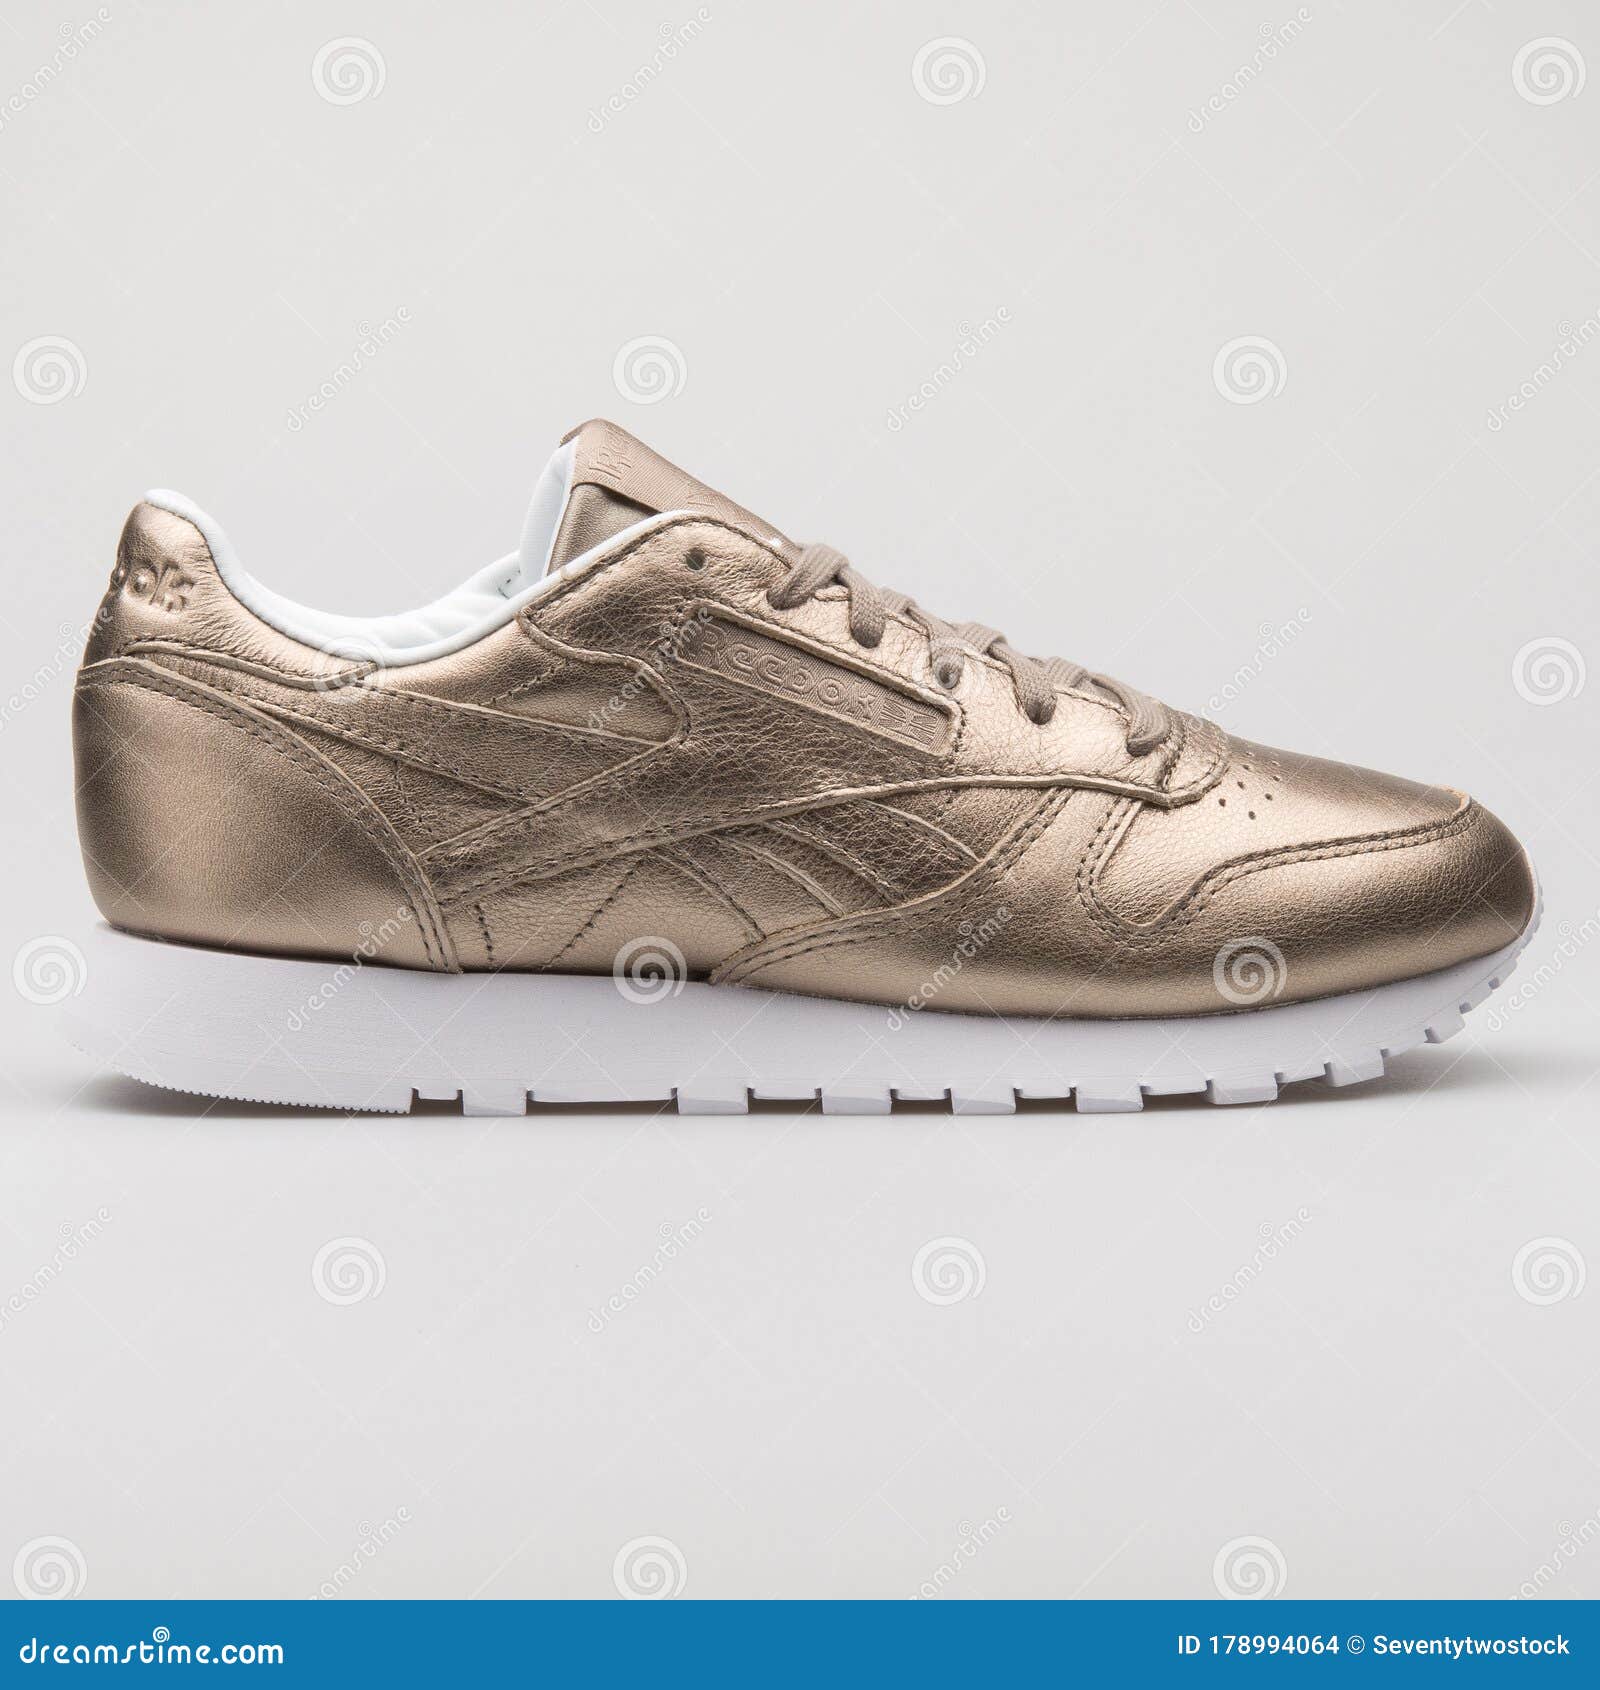 Reebok Leather Melted Metal Grey and Sneaker Editorial Stock Image - Image of fitness, accessories: 178994064